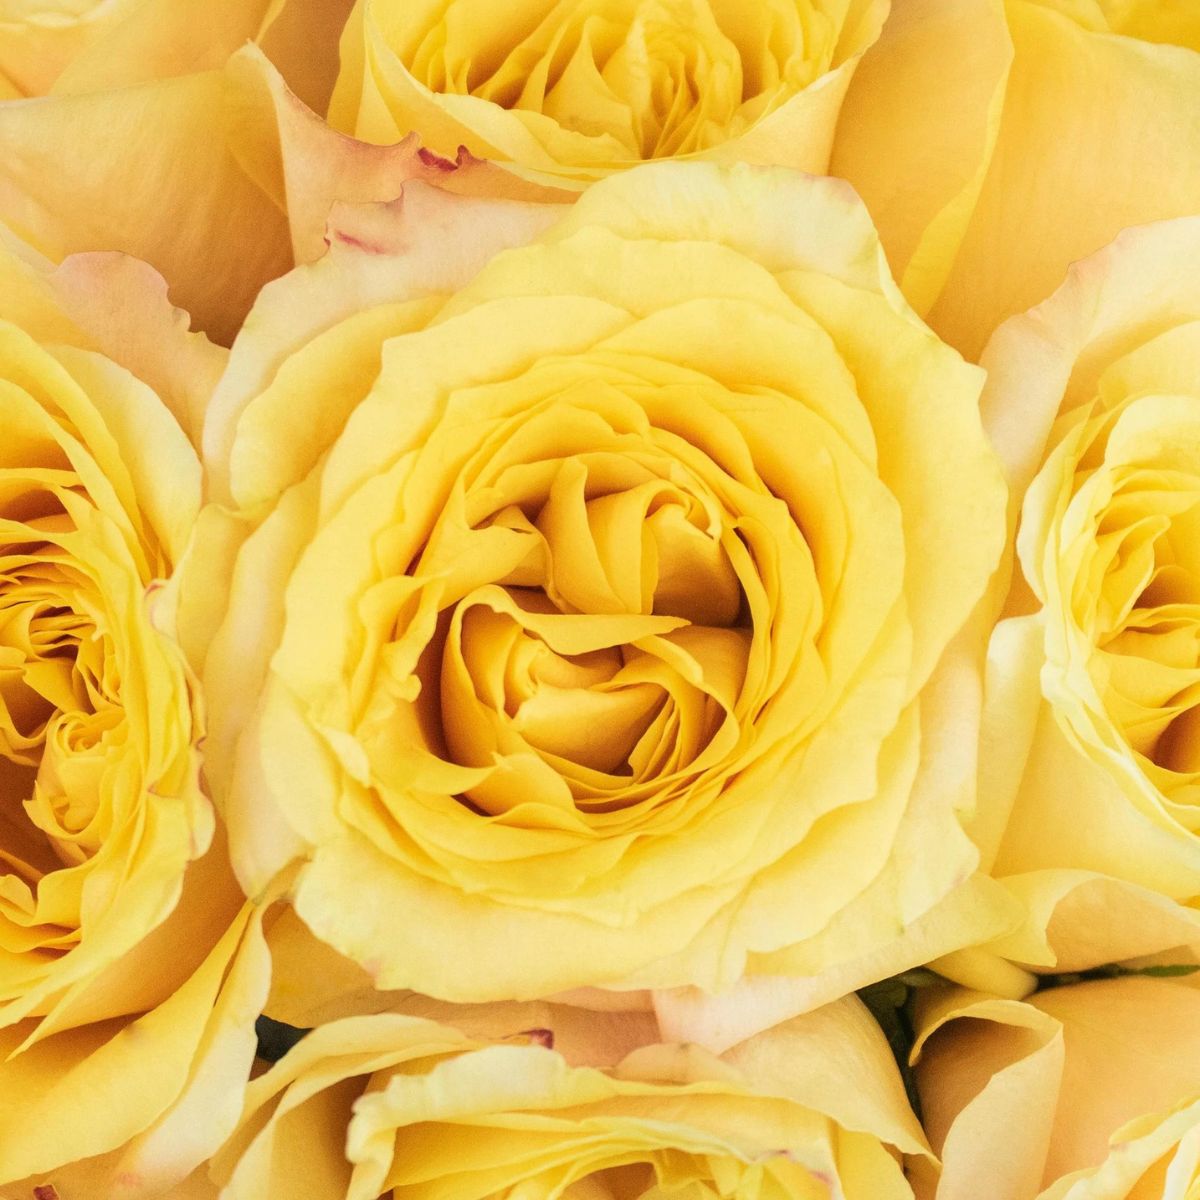 What yellow roses symbolize